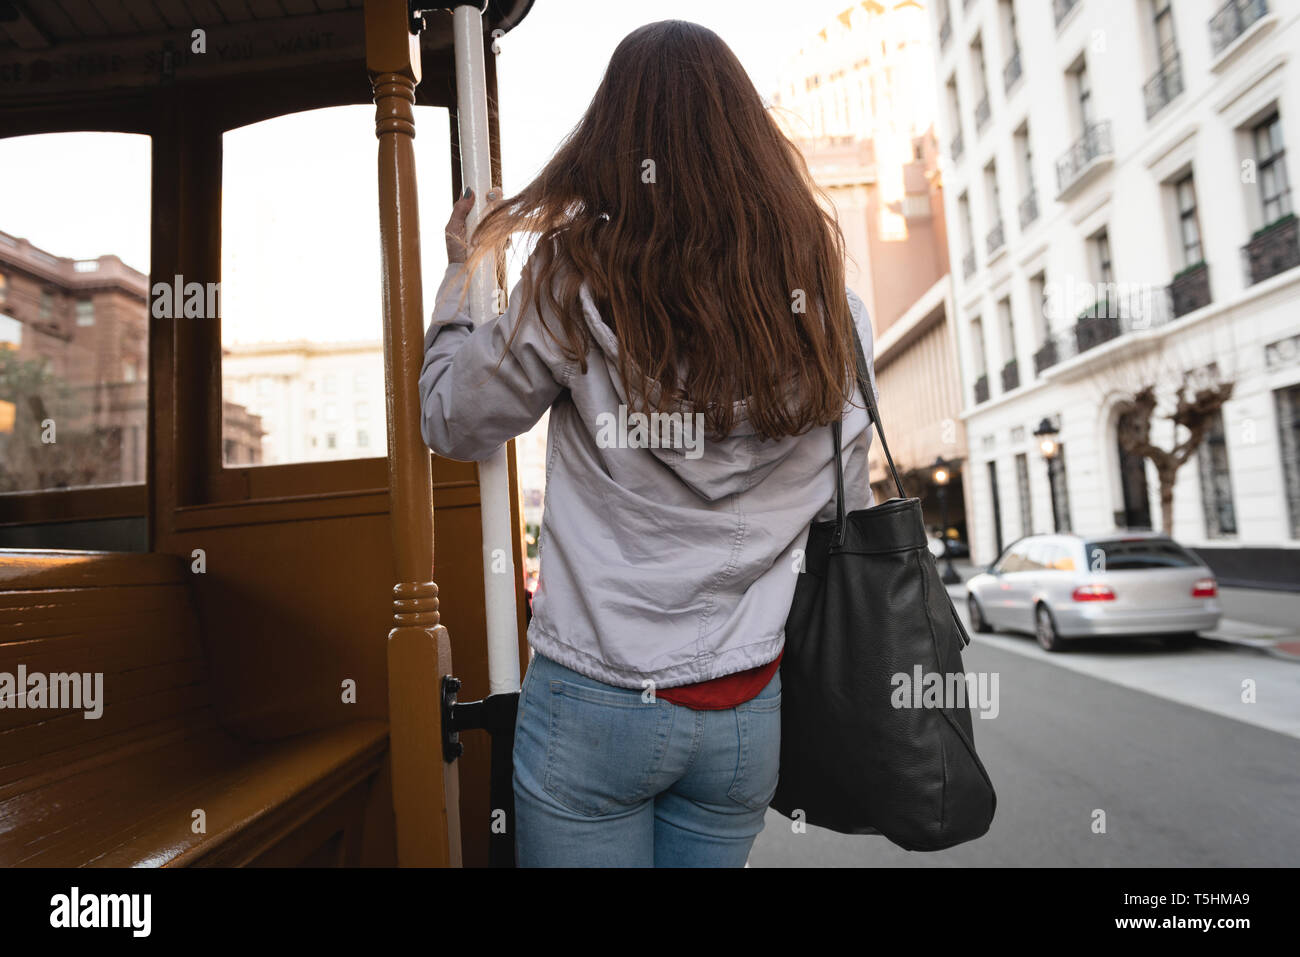 Happy woman hanging outside the moving vehicle Stock Photo